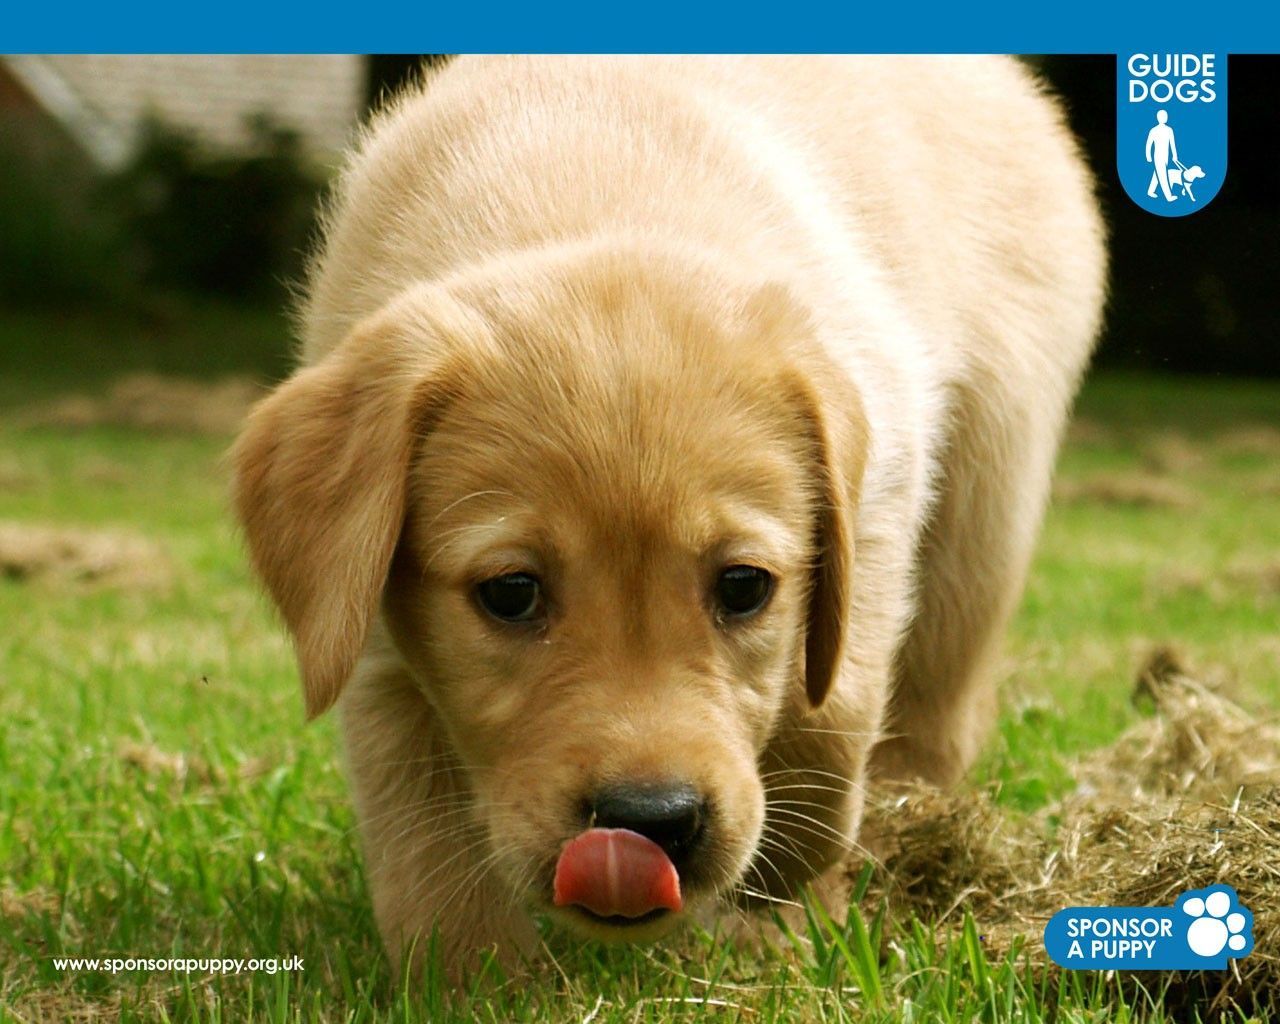 Sponsor a Puppy Playzone - Wallpapers and Games | Guide Dogs